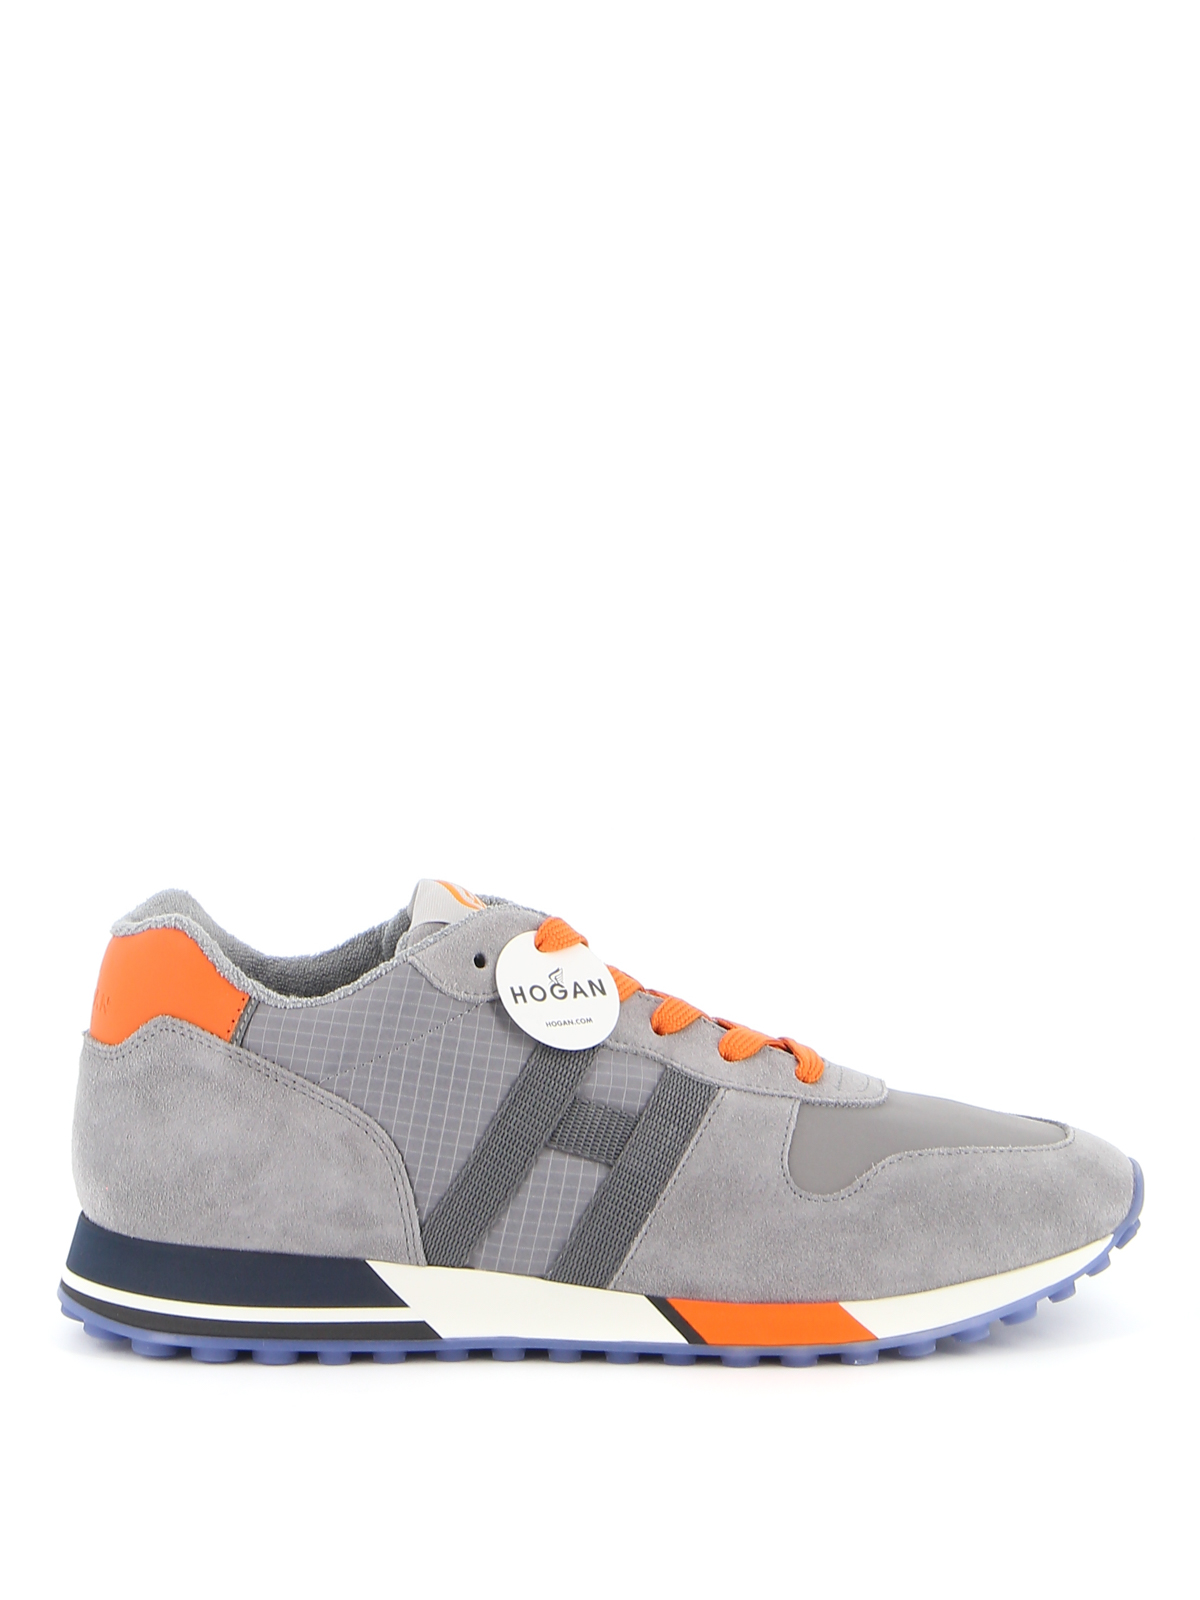 Trainers Hogan - H383 sneakers - HXM3830AN51N4X50C6 | Shop online at iKRIX